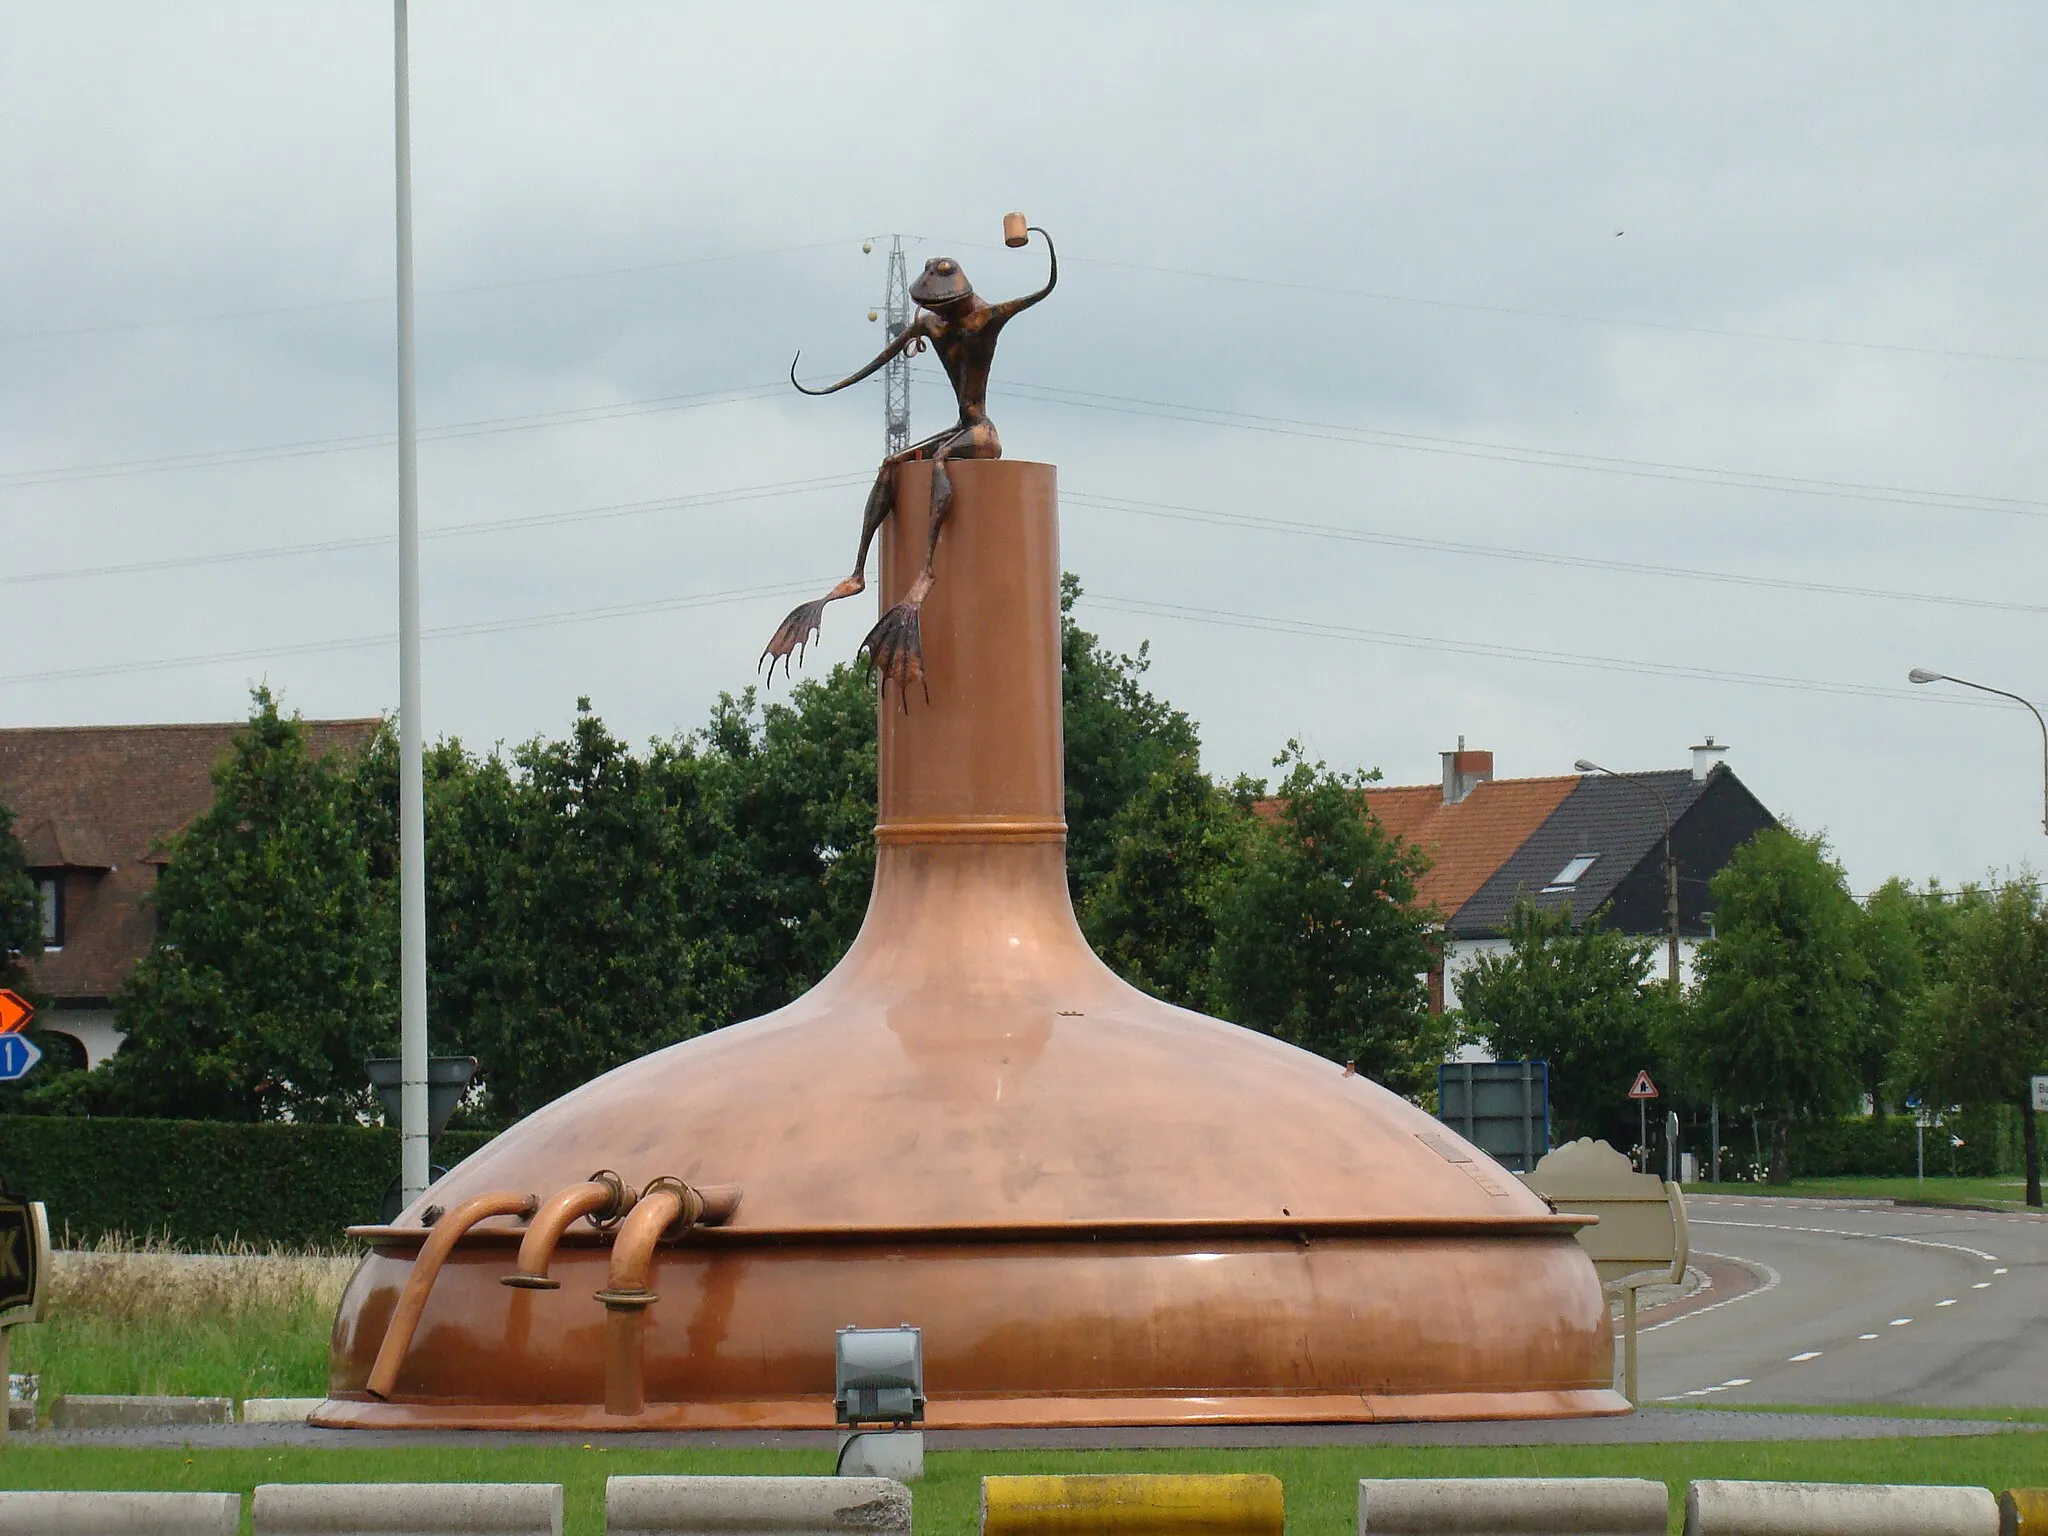 Photo showing: Roundabout decorated with artwork referring to (and sponsored by) the local Bavik Brewery